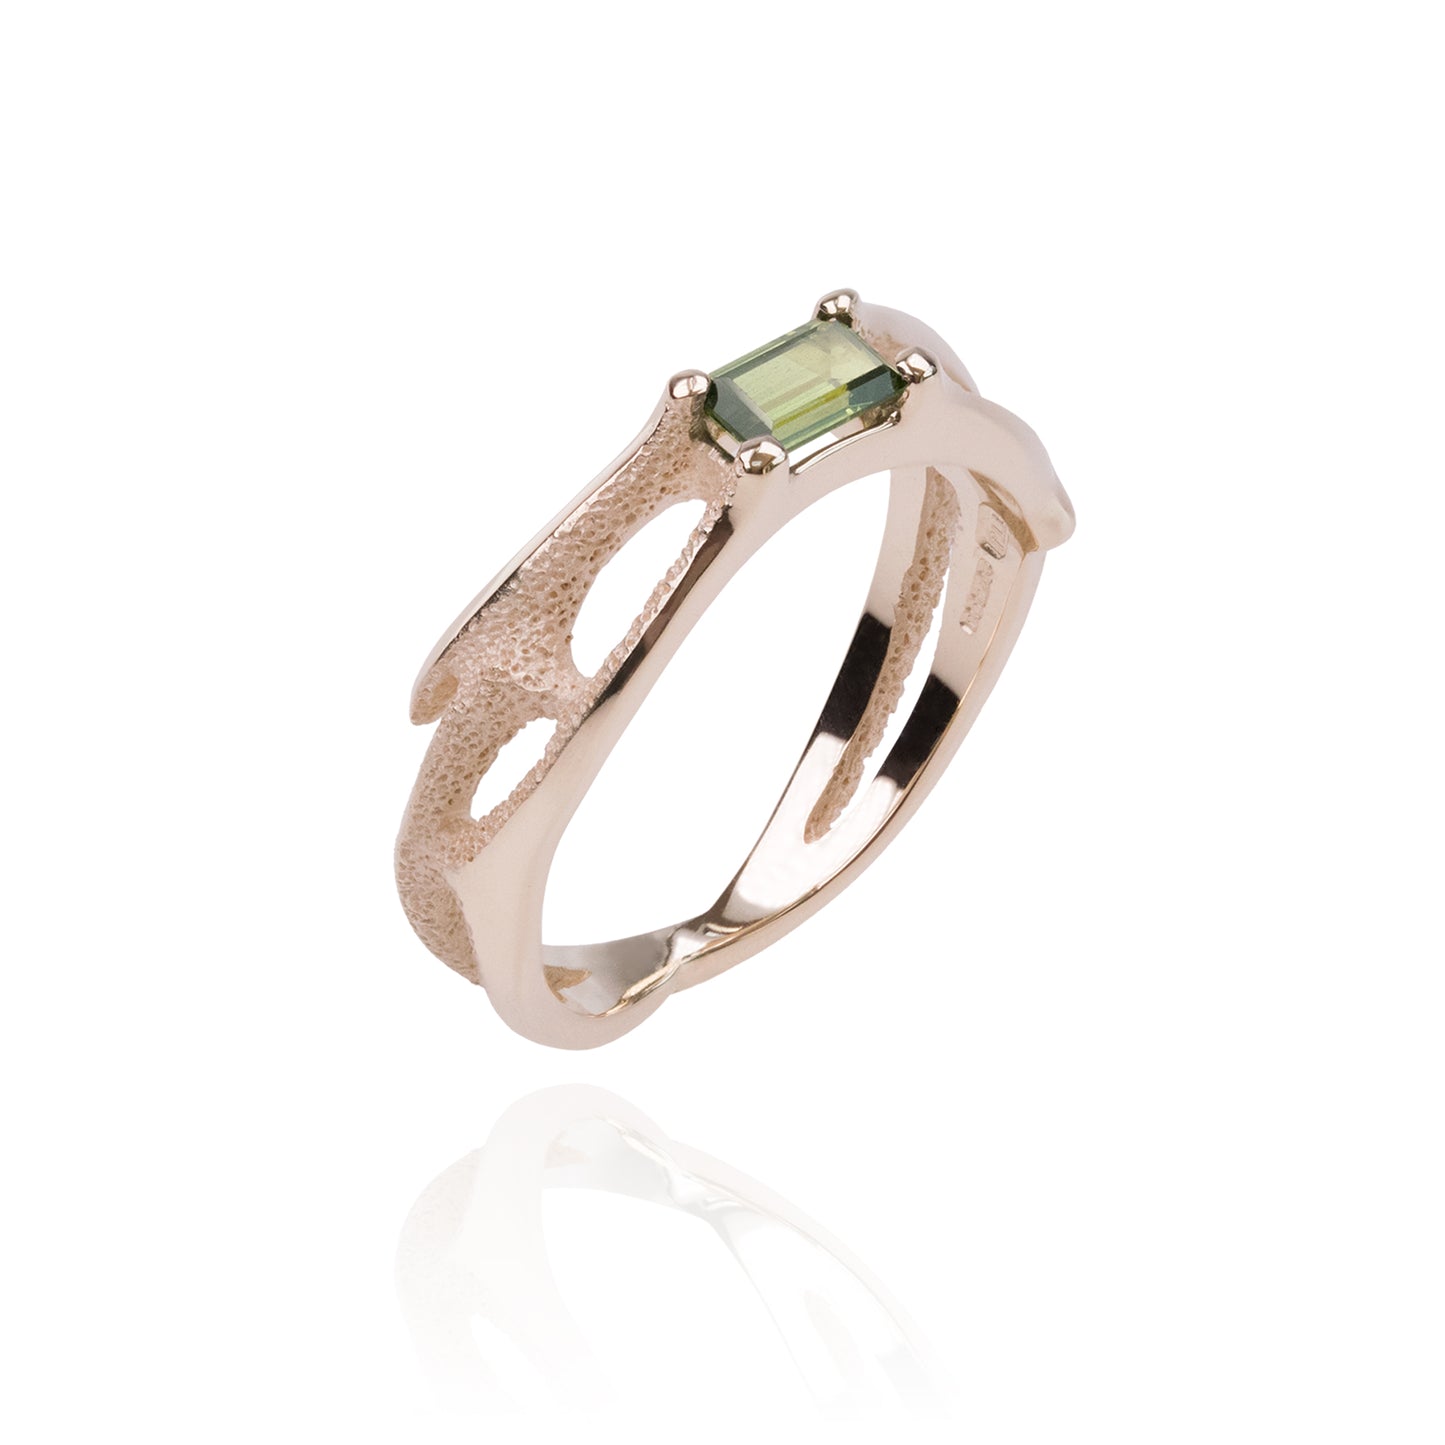 Orme-Brown Contemporary Fine Jewellery Engagement ring in sustainable recycled 9ct yellow gold with ethical baguette cut green sapphire